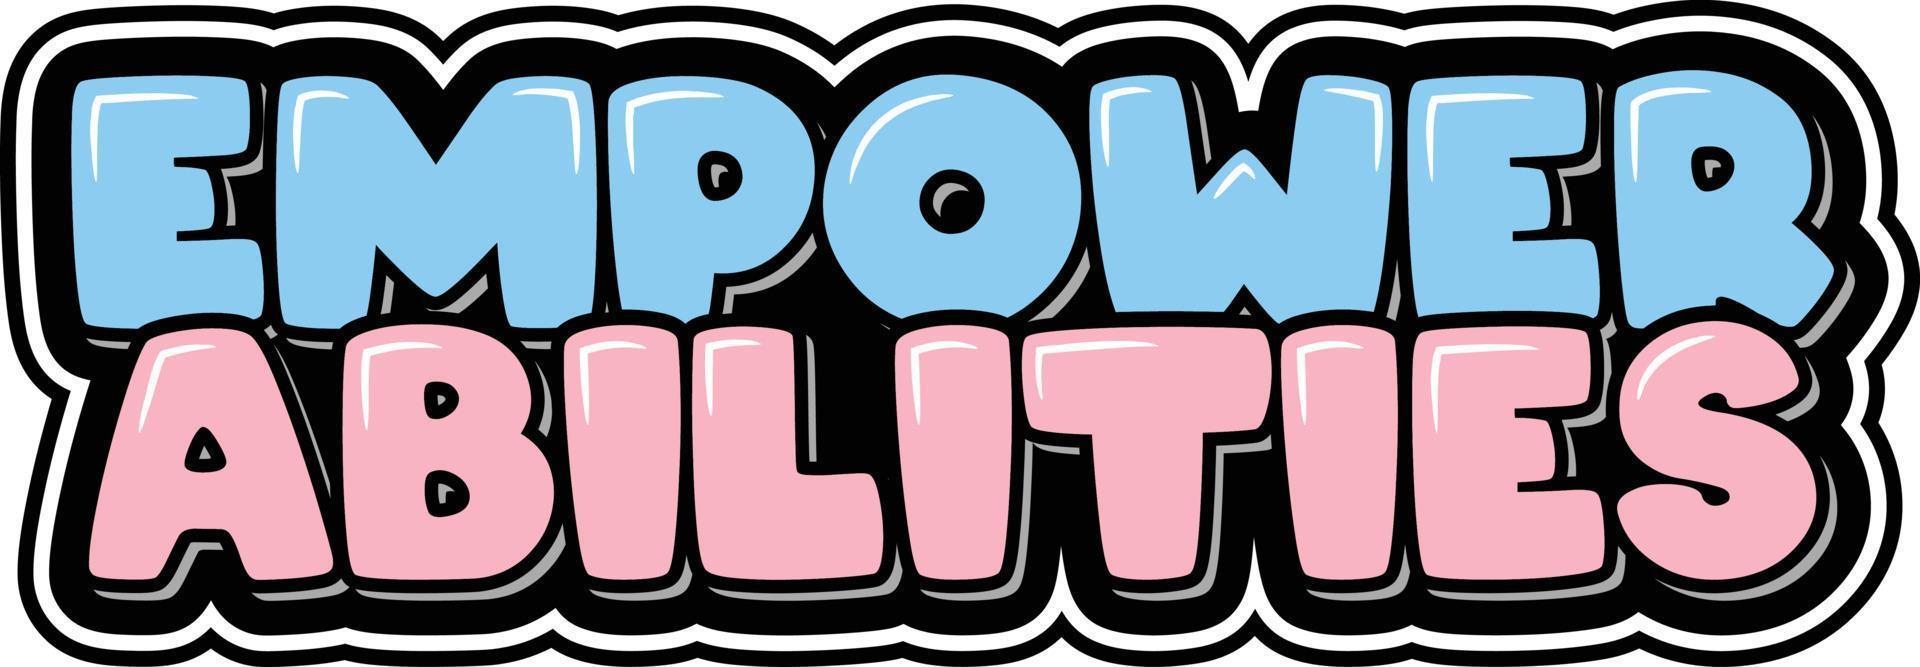 Empower Abilities Lettering Vector Design